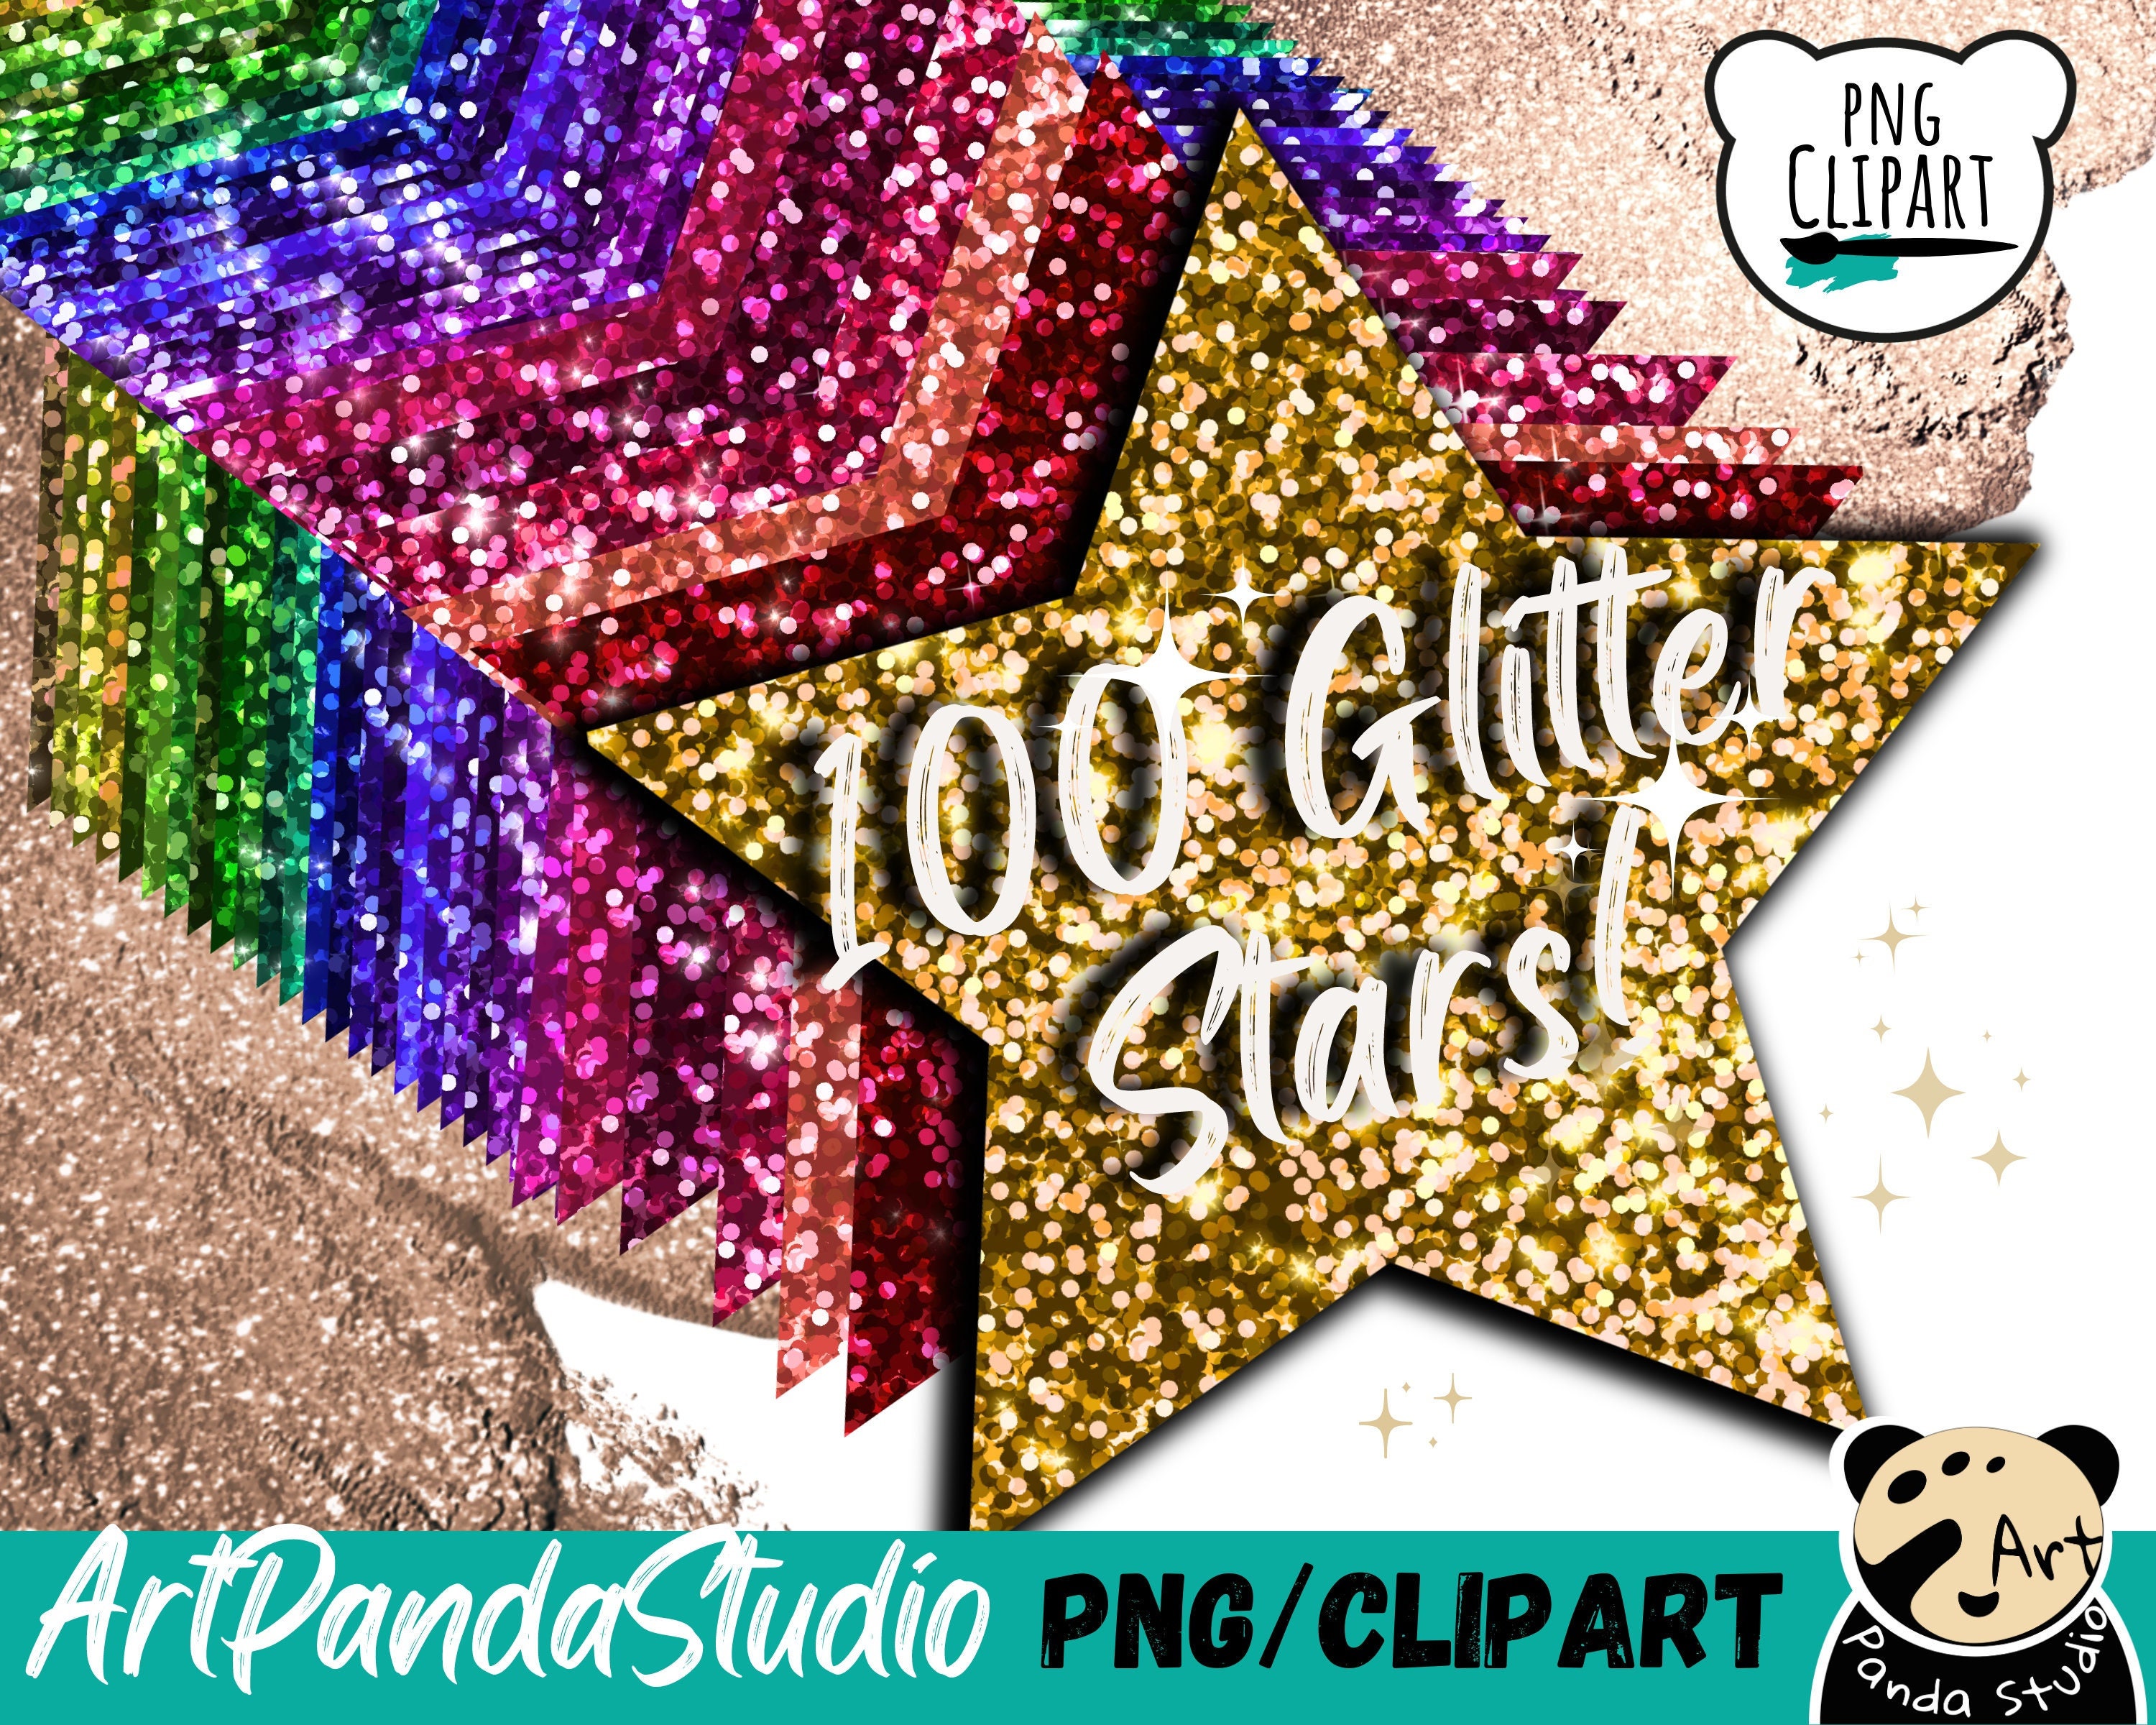 21 Silver Glitter Stars Clipart Set, Silver Glitter Star Frames and  Borders, PNG Galaxy Stardust Overlay, Star Clip Art, Commercial Use 